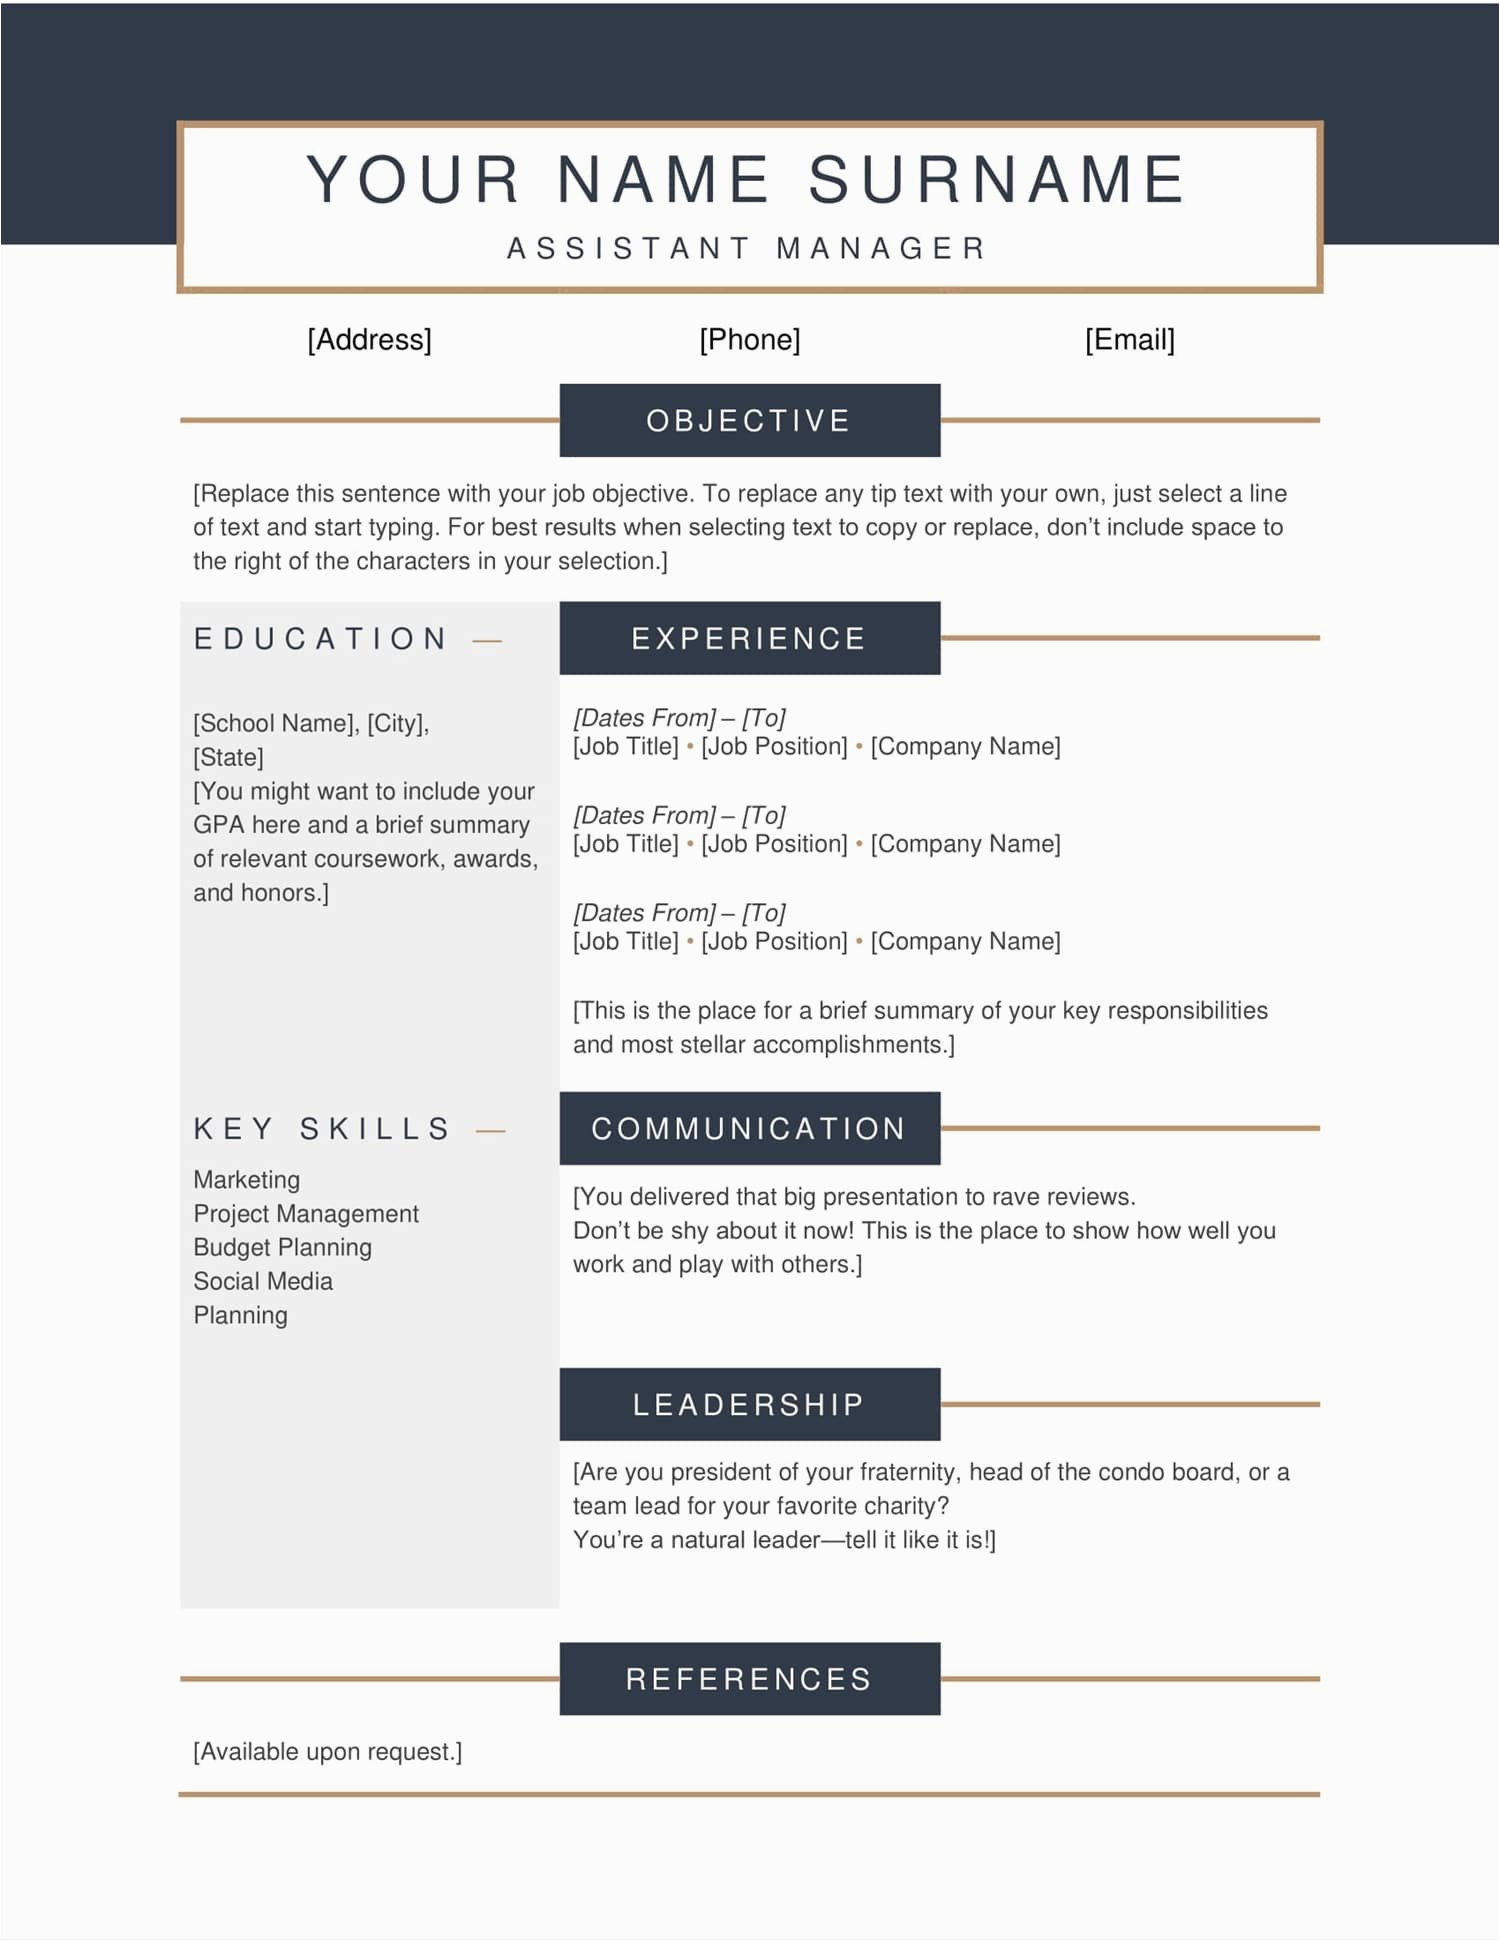 Resume and Cv Templates Free Download Resume Templates that I Can Copy and Paste